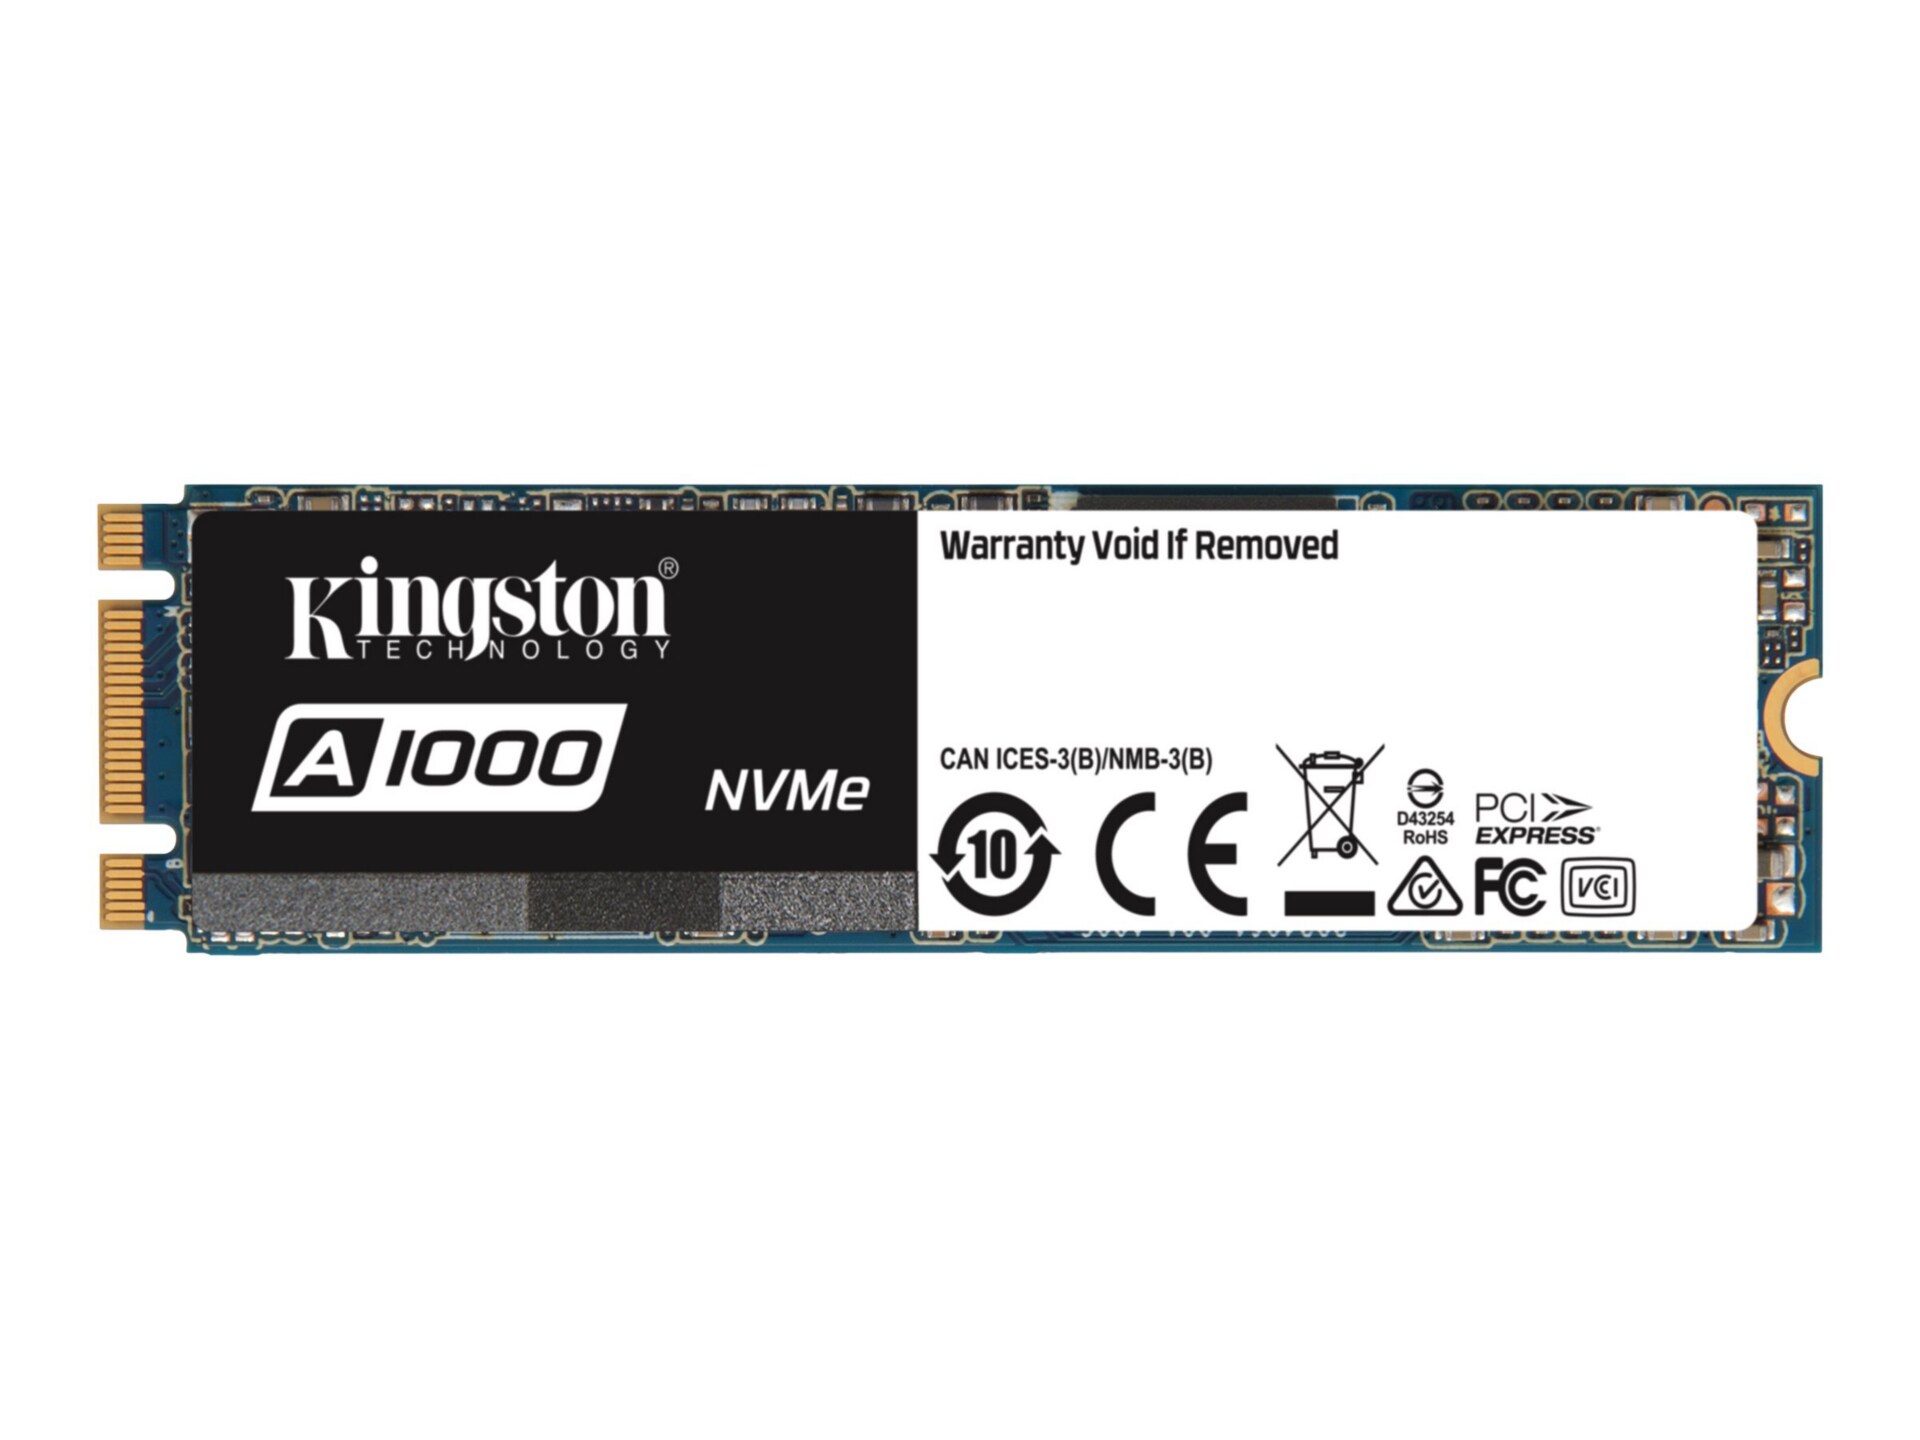 Kingston A1000 - solid state drive - 960 GB - PCI Express 3.0 x2 (NVMe)